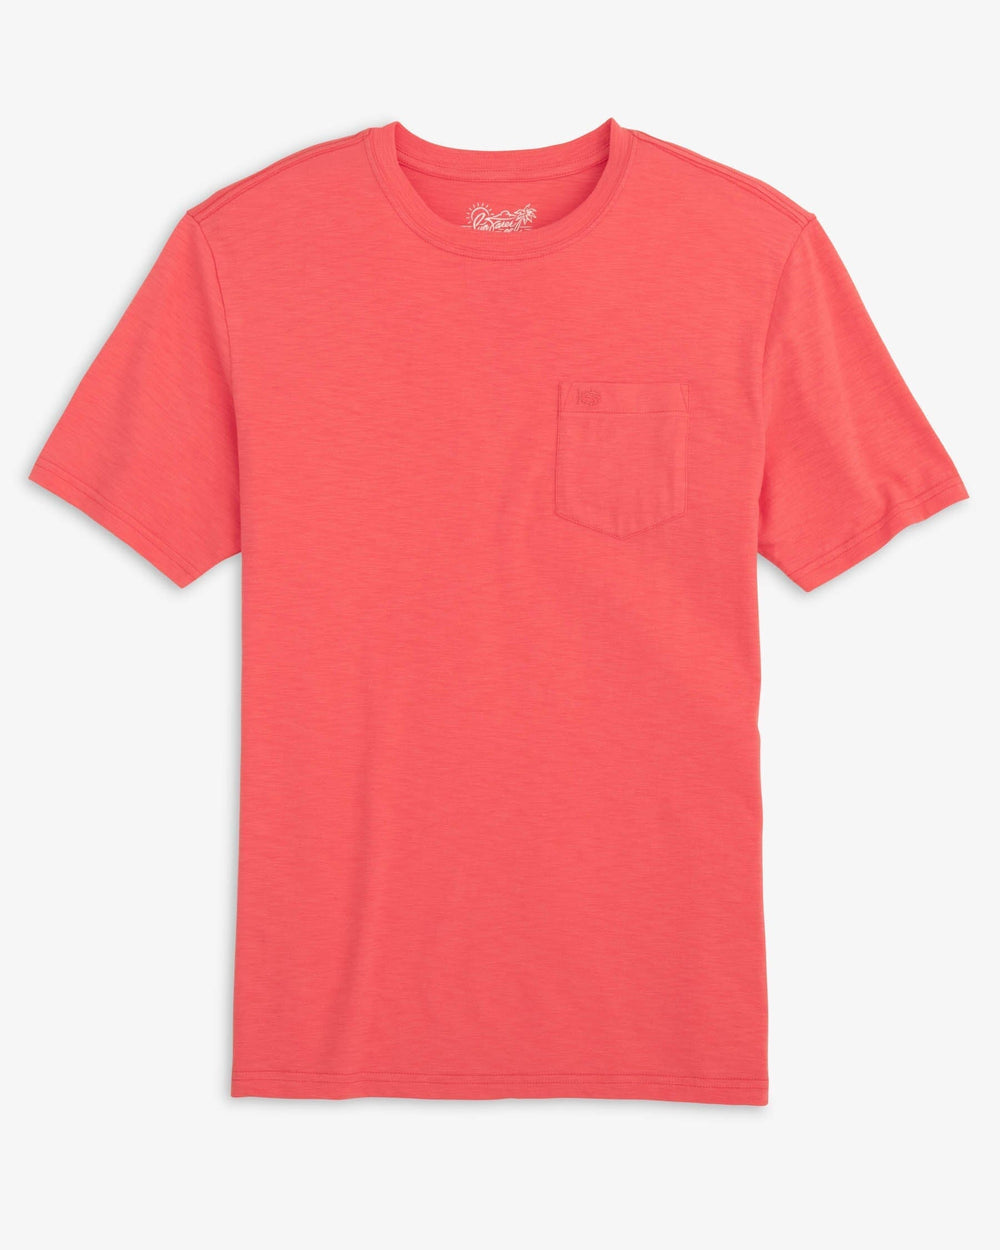 The front view of the Southern Tide Sun Farer Short Sleeve T-Shirt by Southern Tide - Sunkist Coral